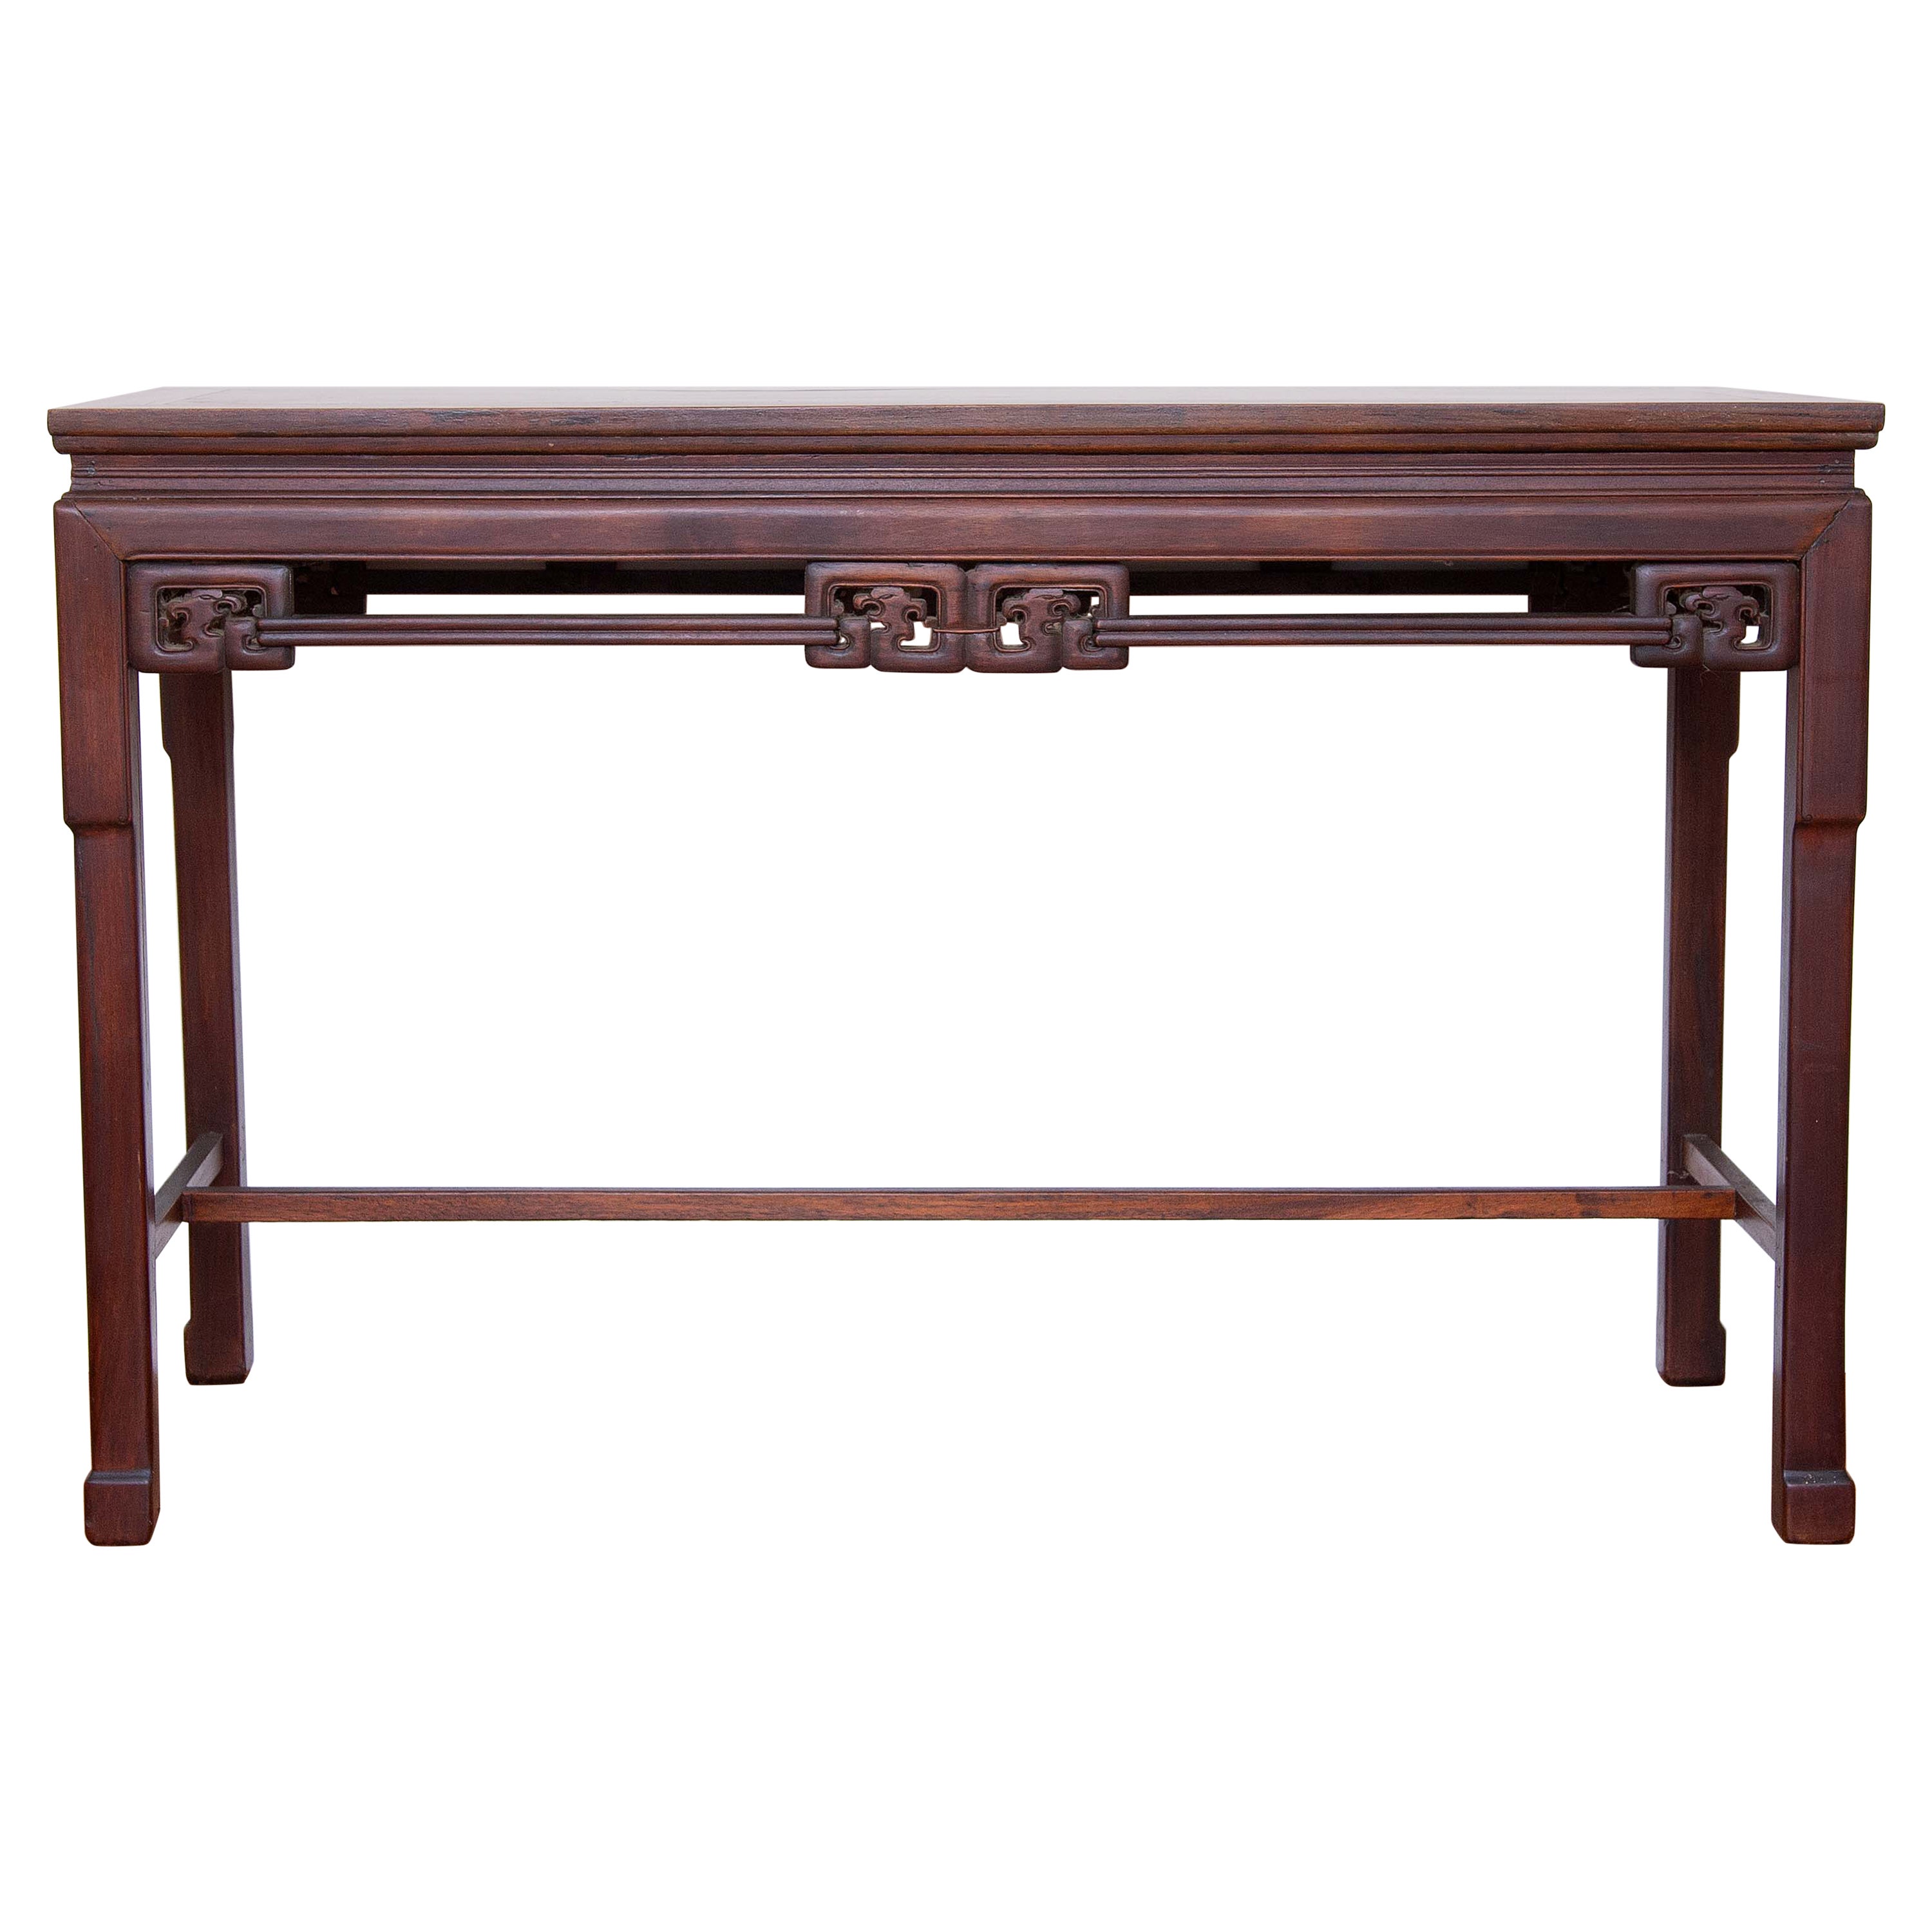 Chinese Carved Teak Wood Console or Sofa Table Circa 1900 For Sale